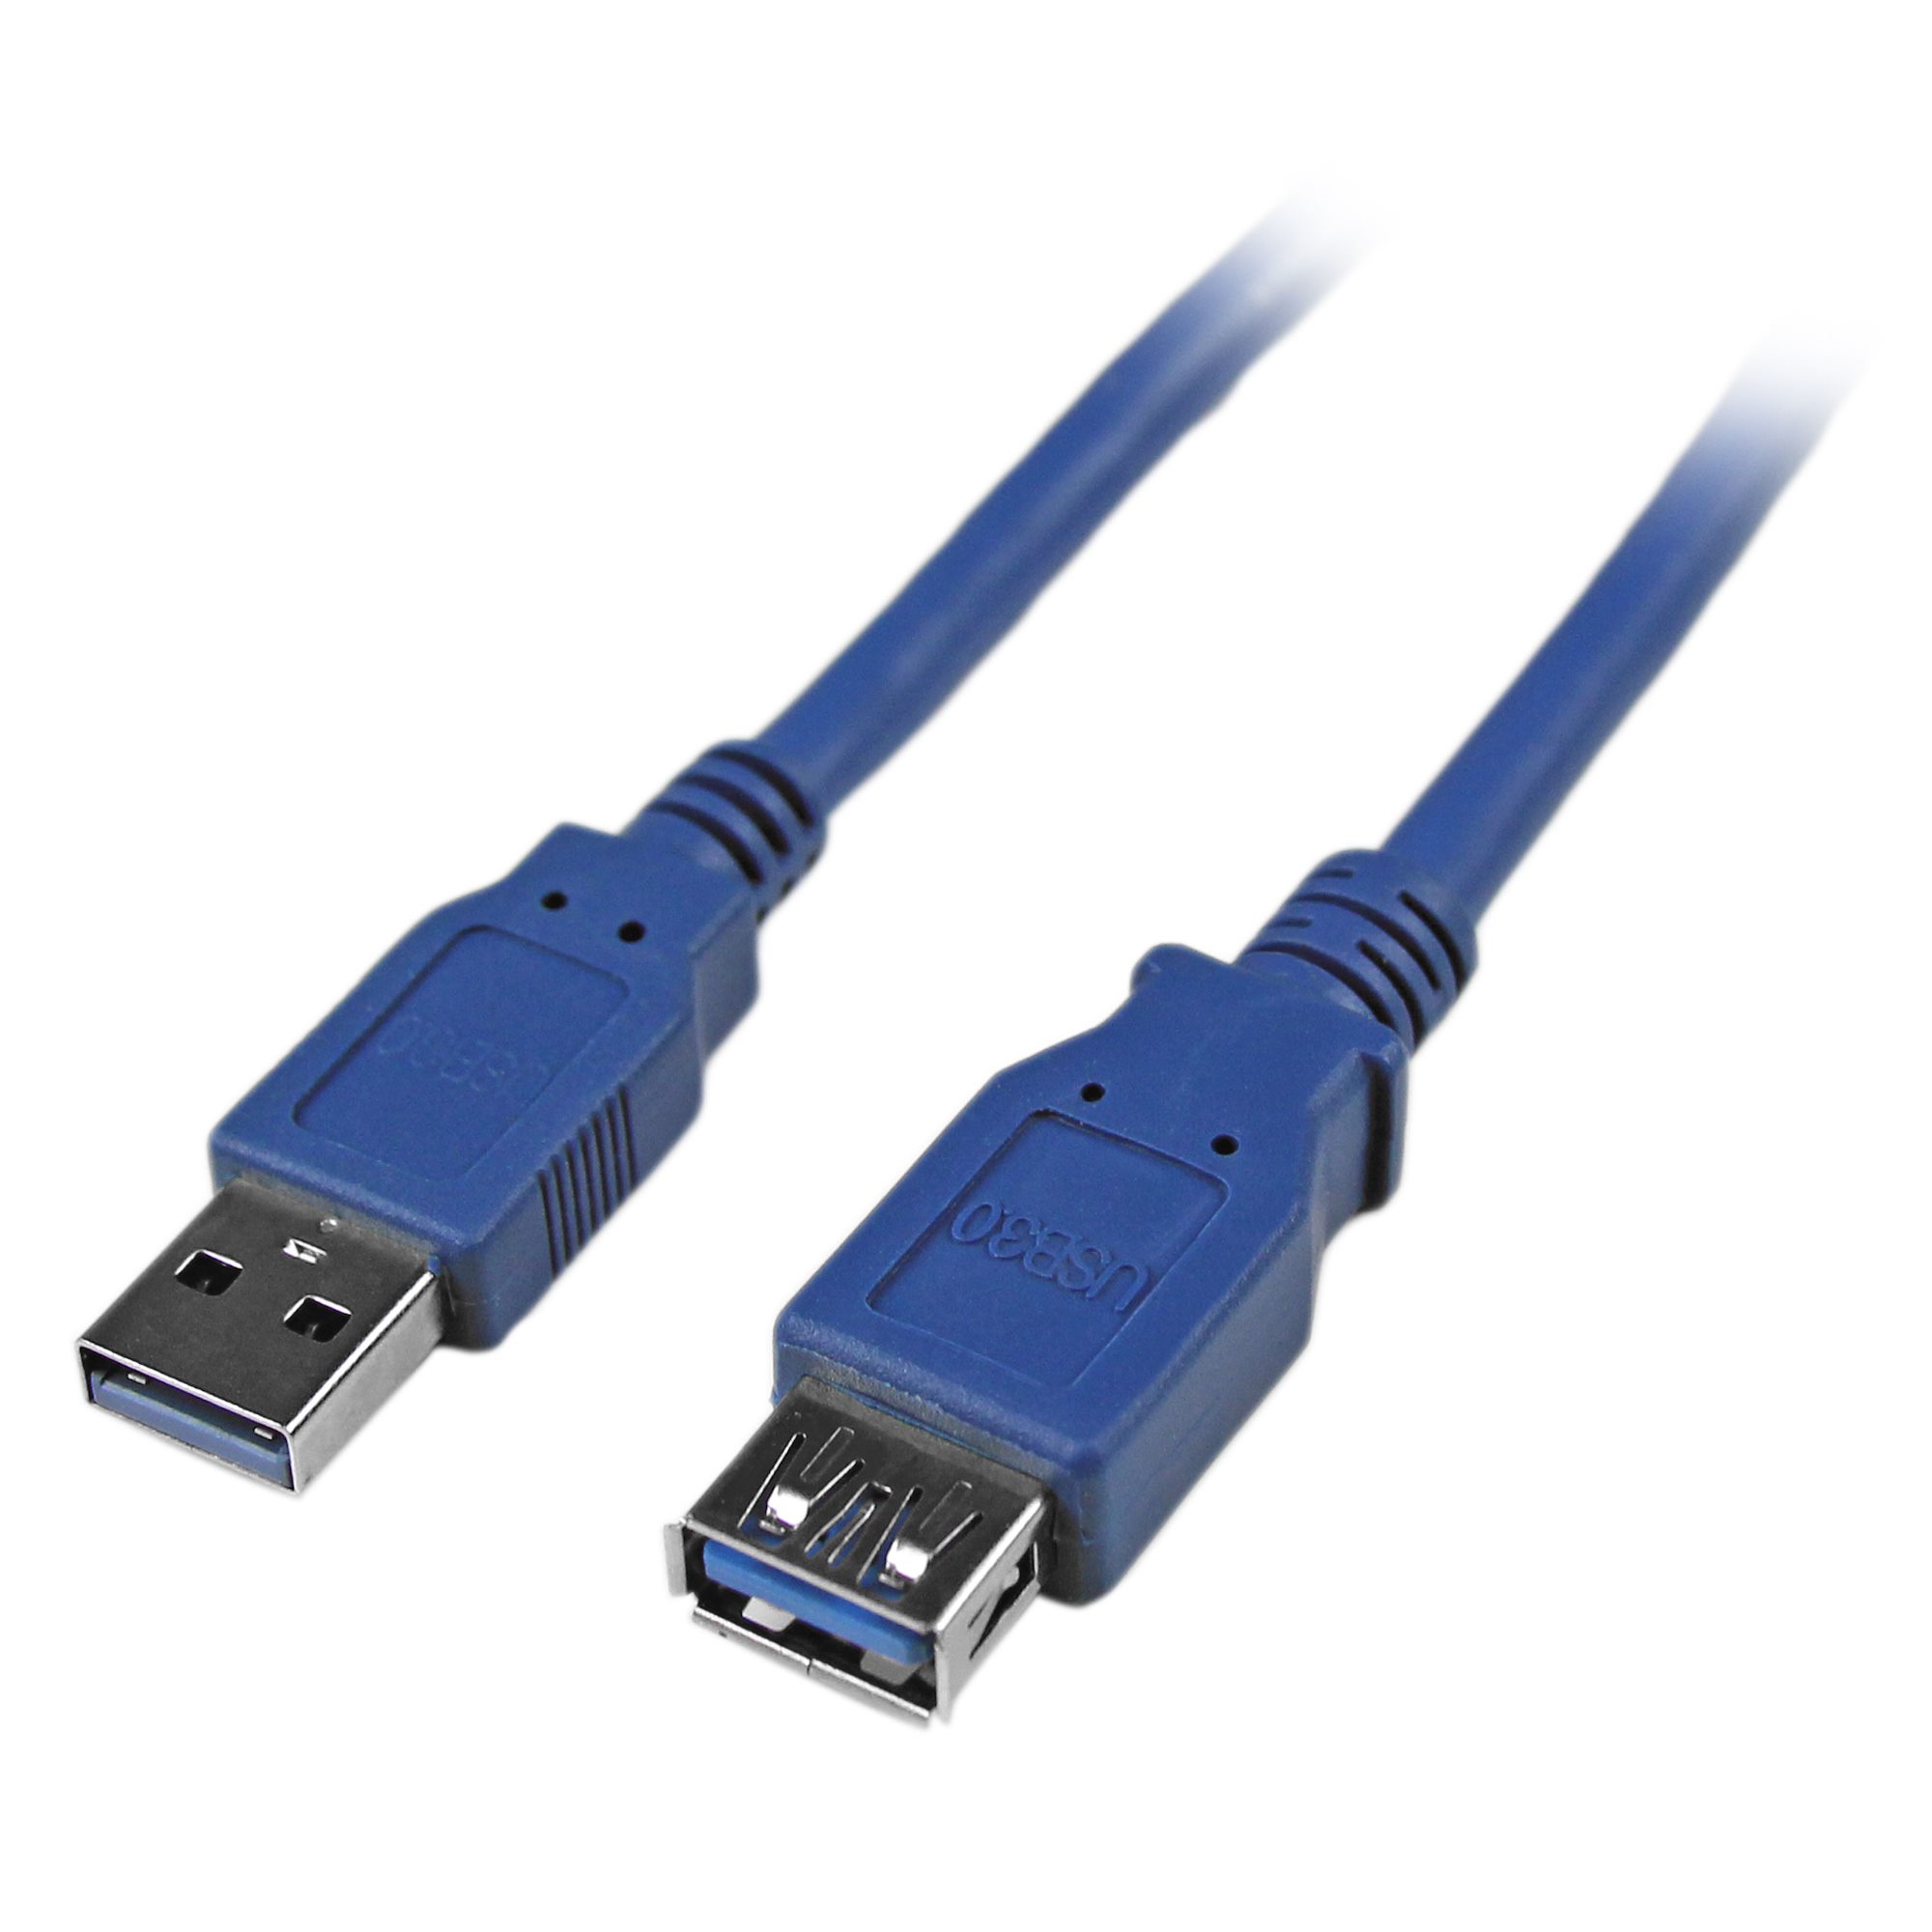 Brand New 6ft 6feet USB 3.0 A Male to A Female Data Extension Cable Blue 